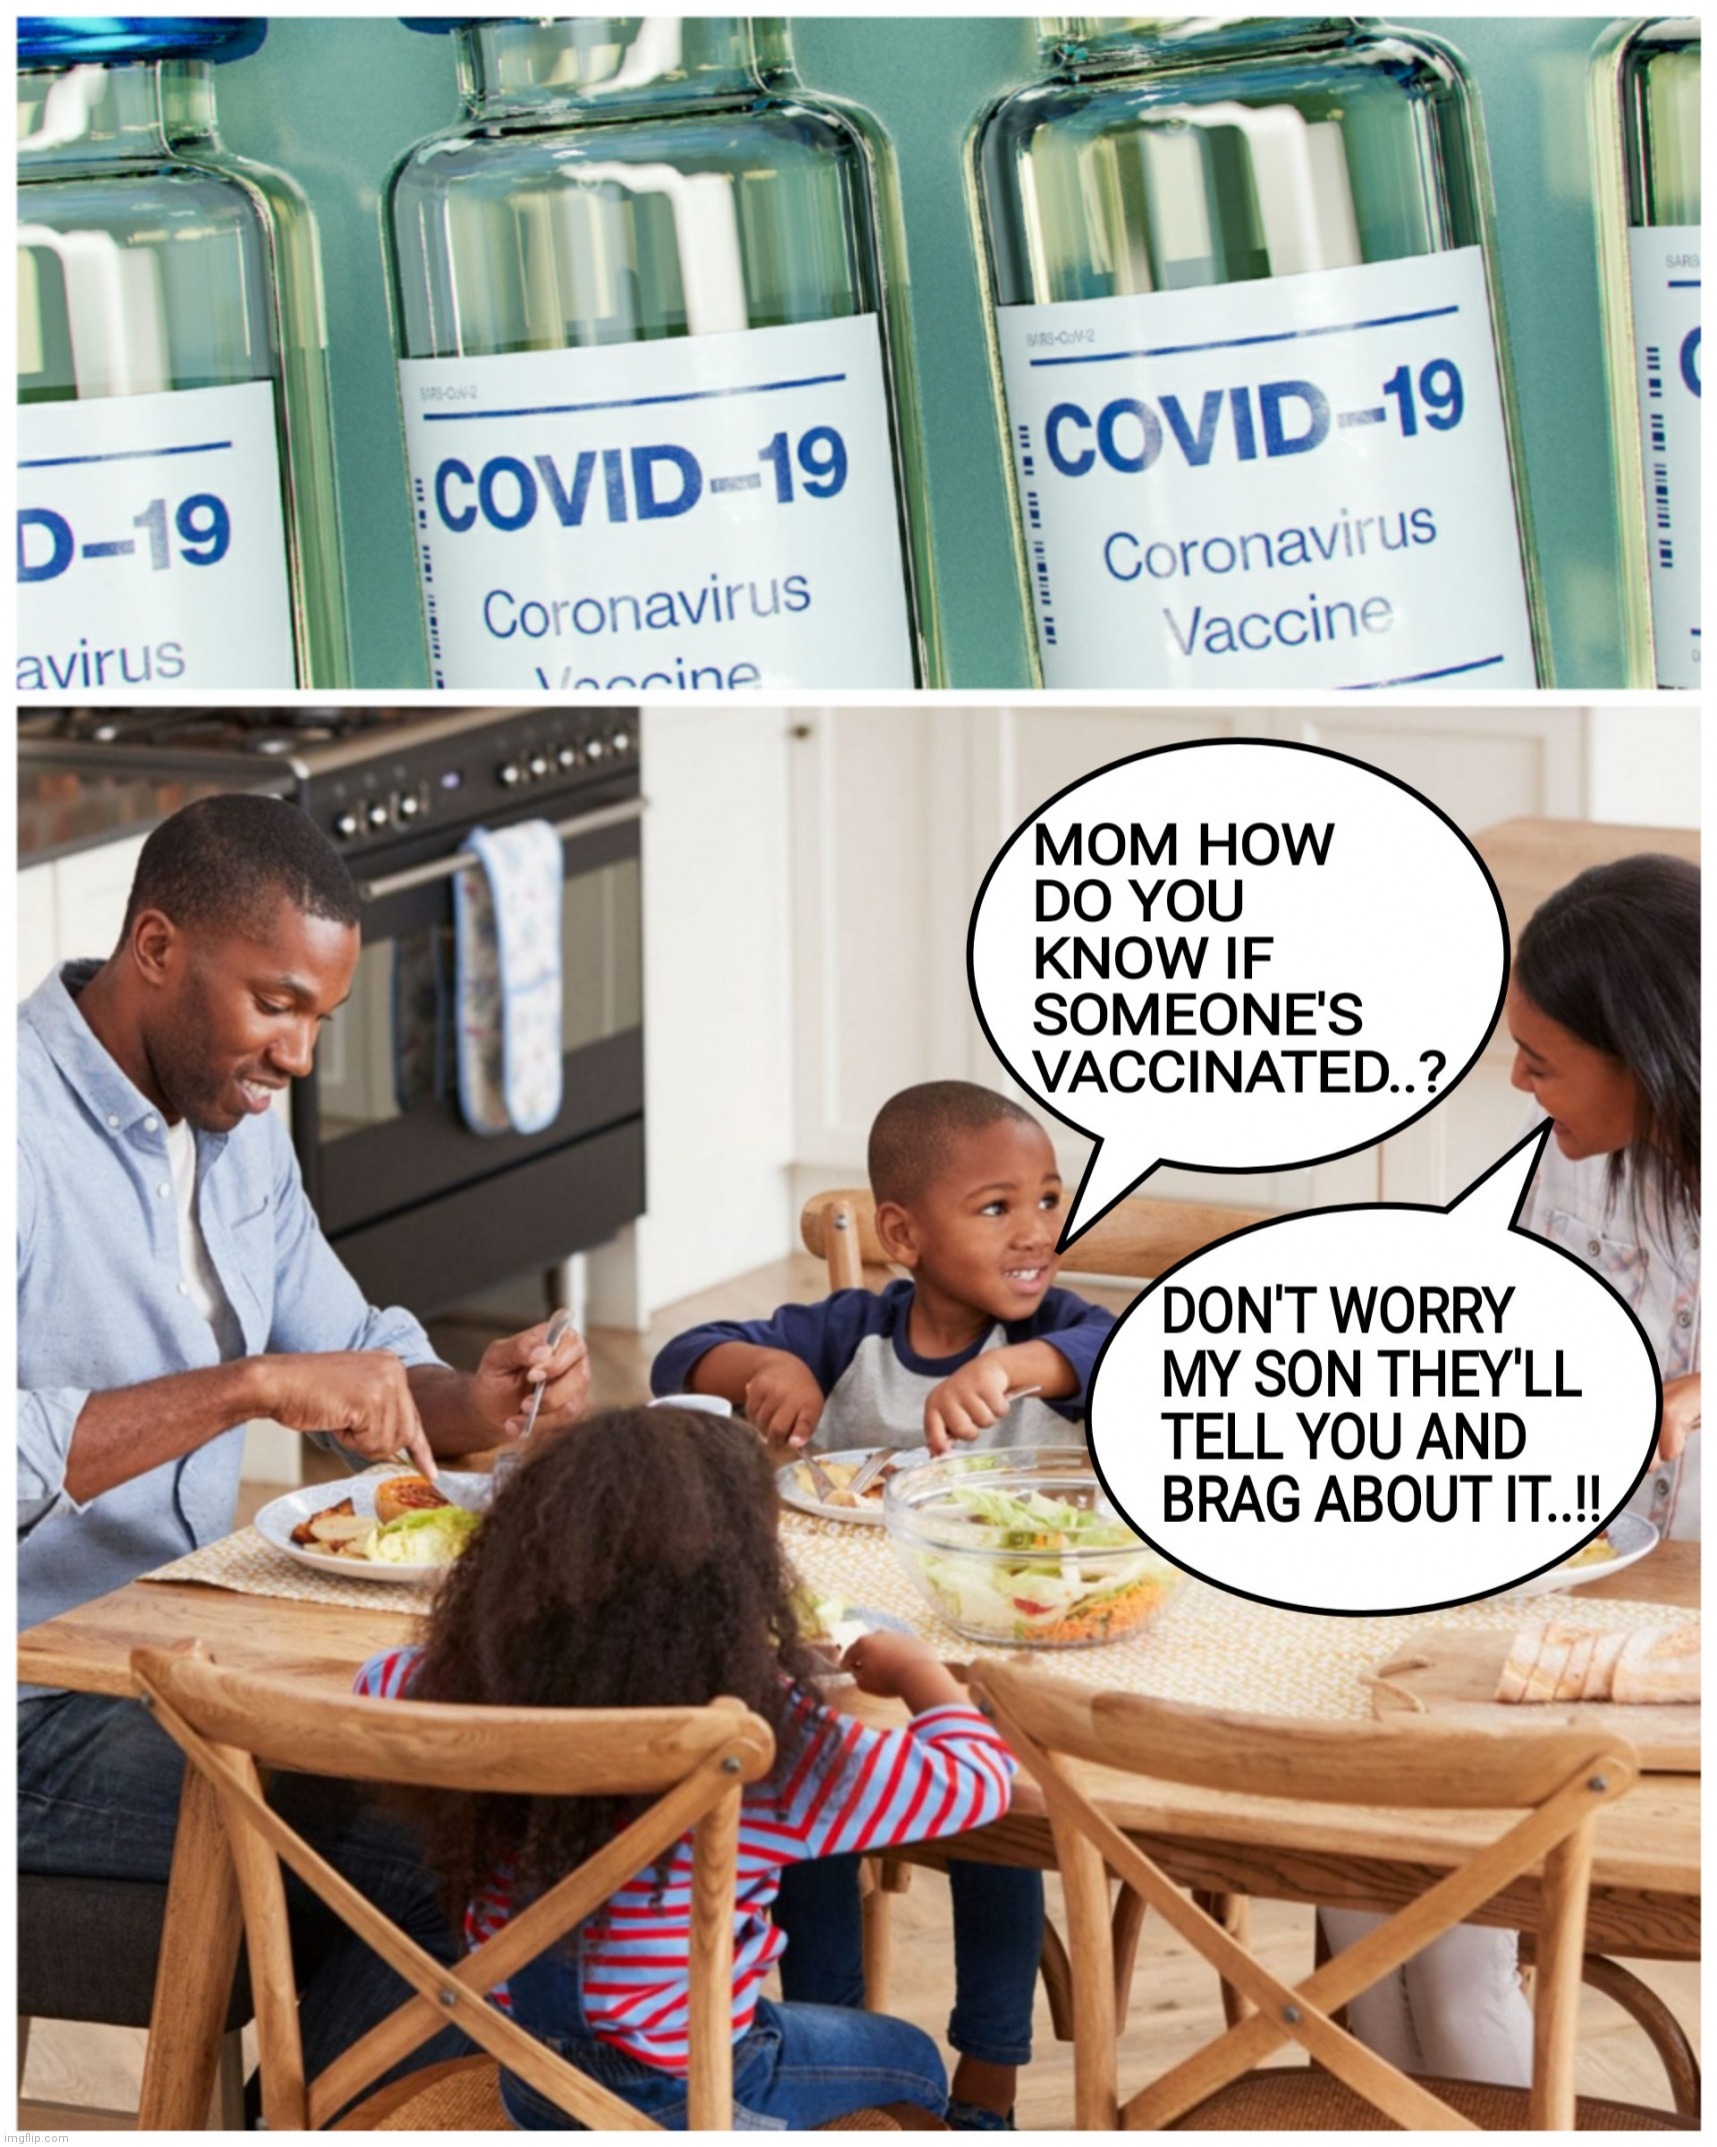 DON'T WORRY MY SON THEY'LL TELL AND BRAG ABOUT IT | image tagged in vaccinations,bragging,covid-19,coronavirus,vaccine,memes | made w/ Imgflip meme maker